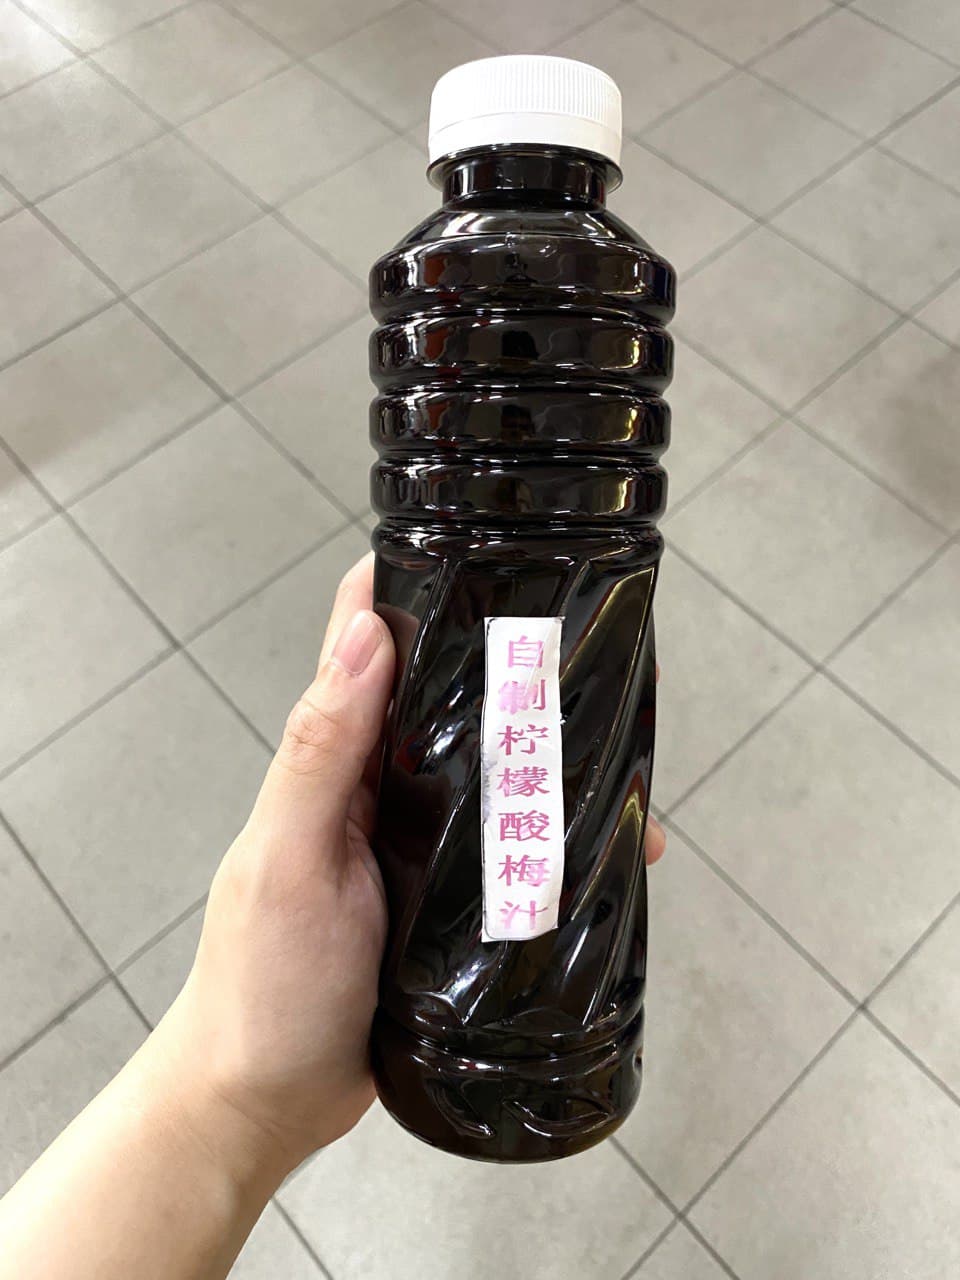 Mun Cheong's "self-created" homemade sour plum-lemon concentrate 